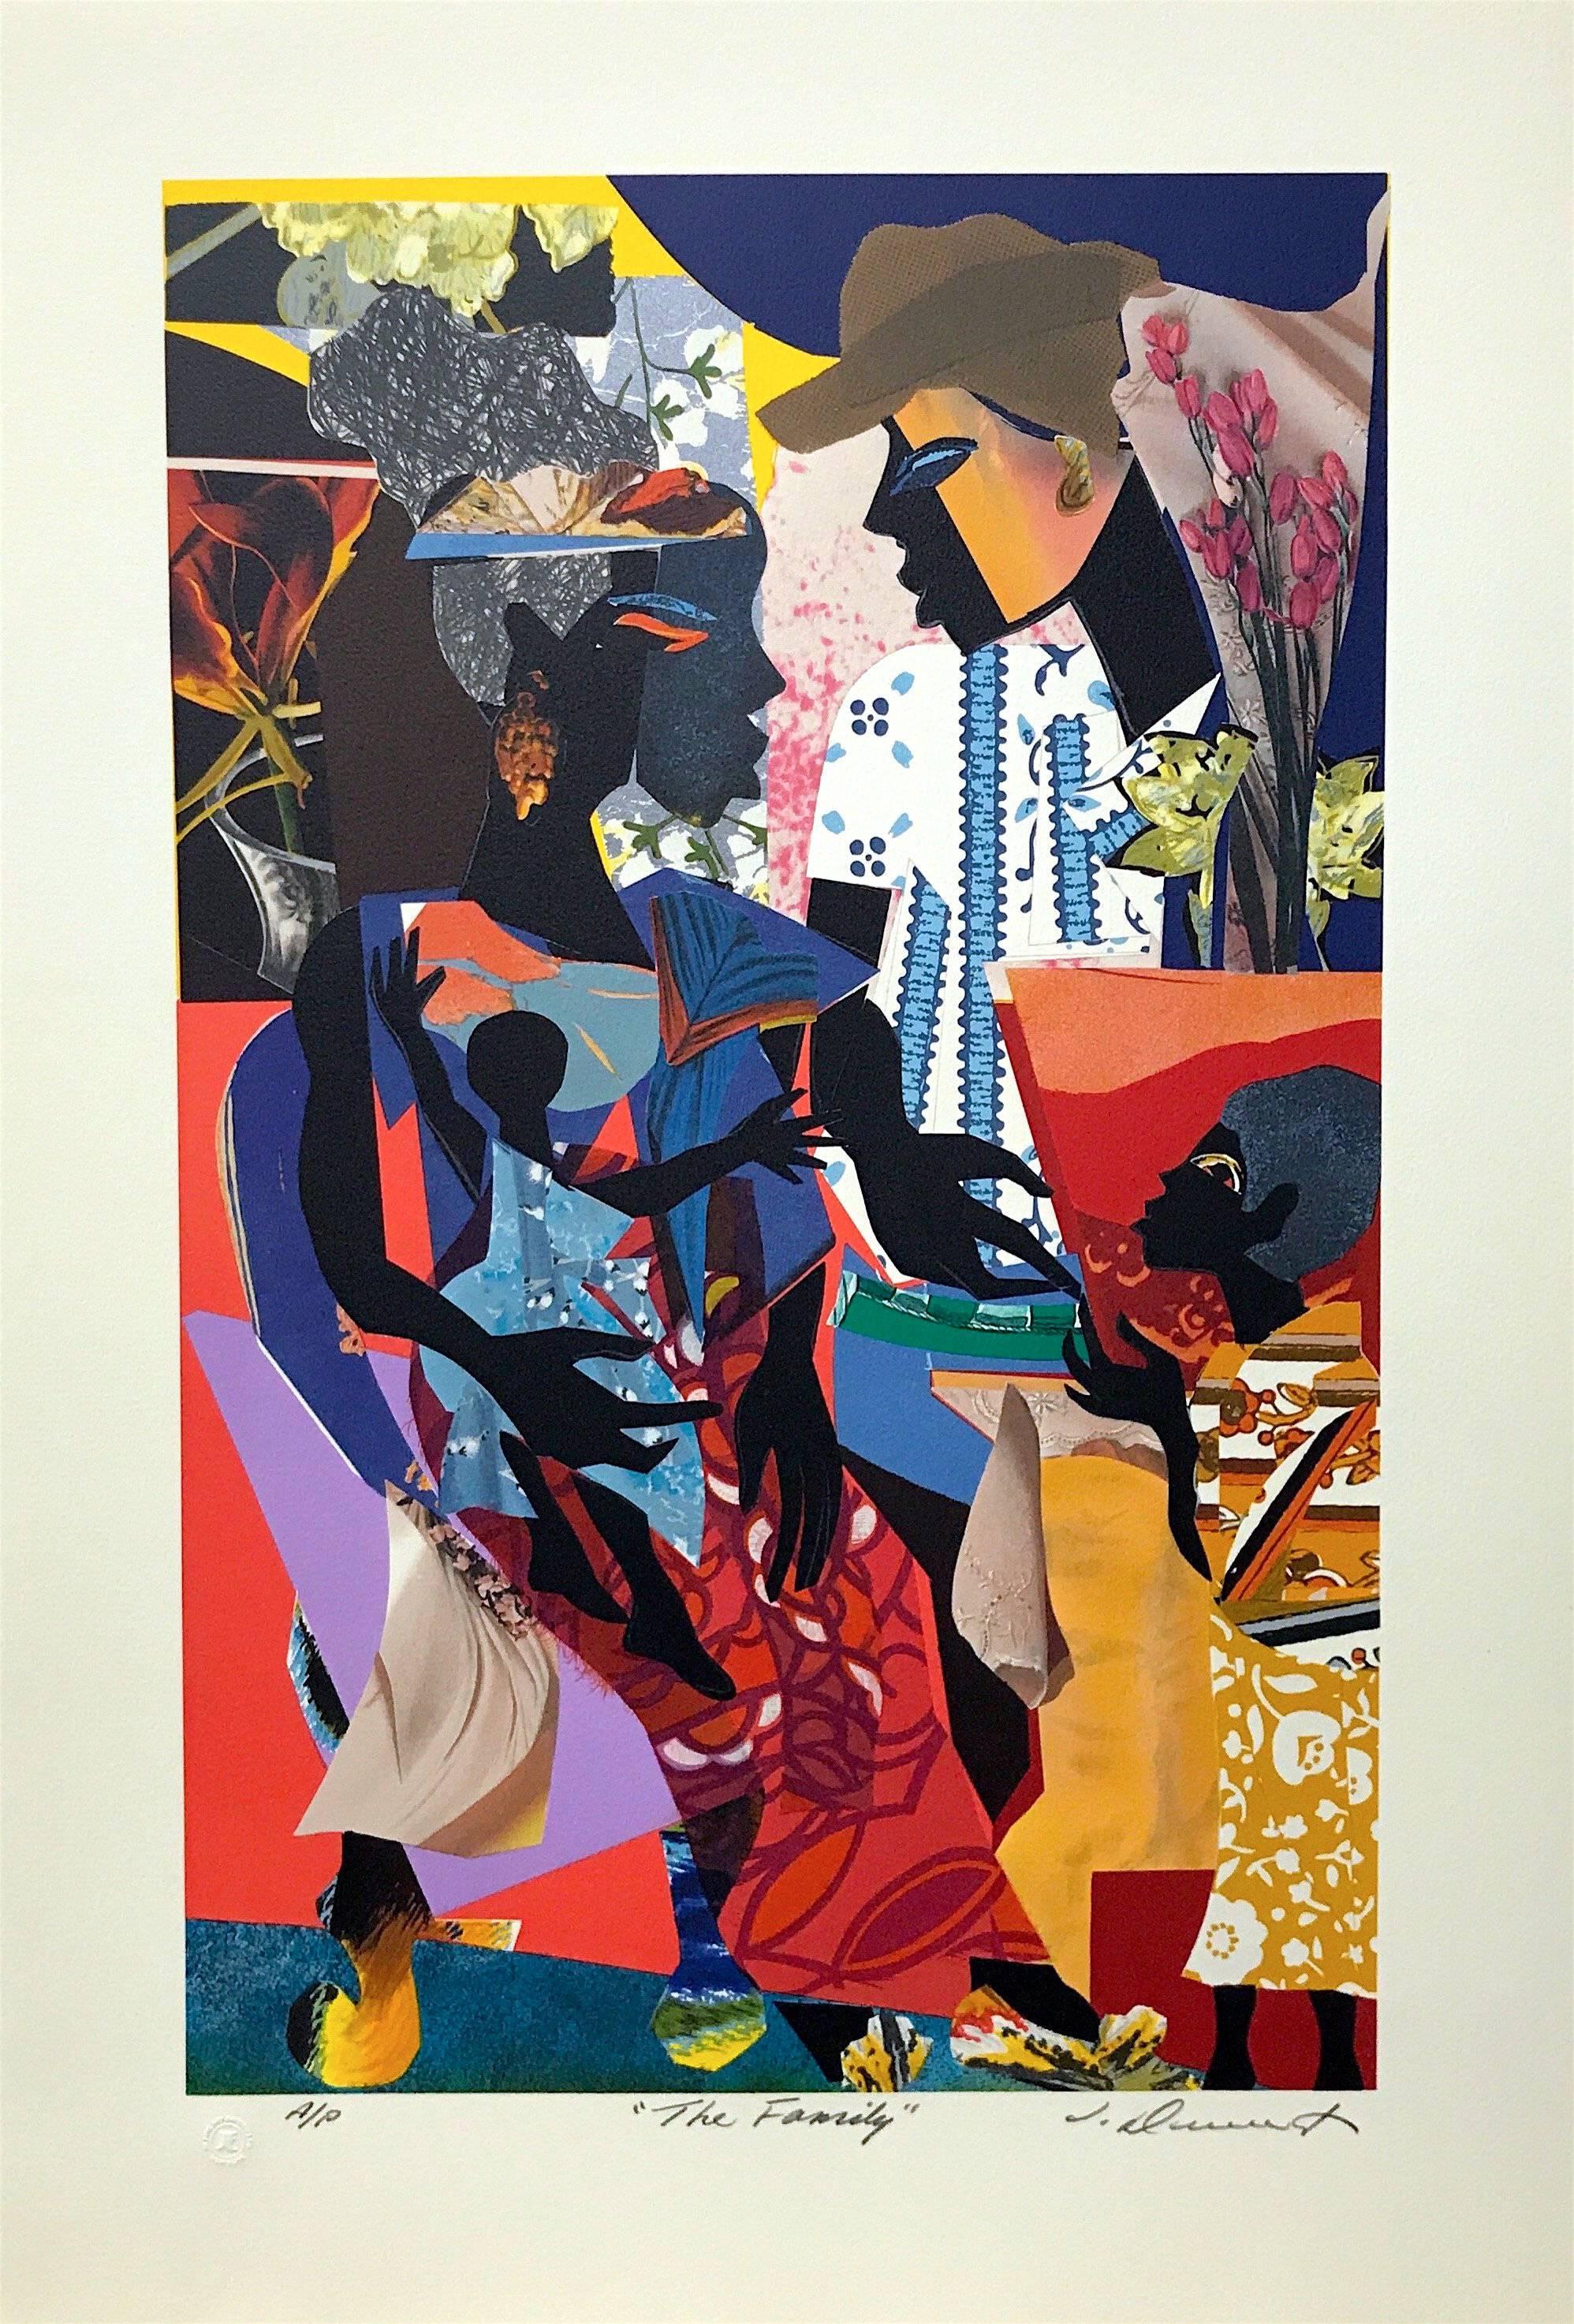 THE FAMILY Signed Lithograph, Black Family Portrait, Collage, African American  - Contemporary Print by James Denmark